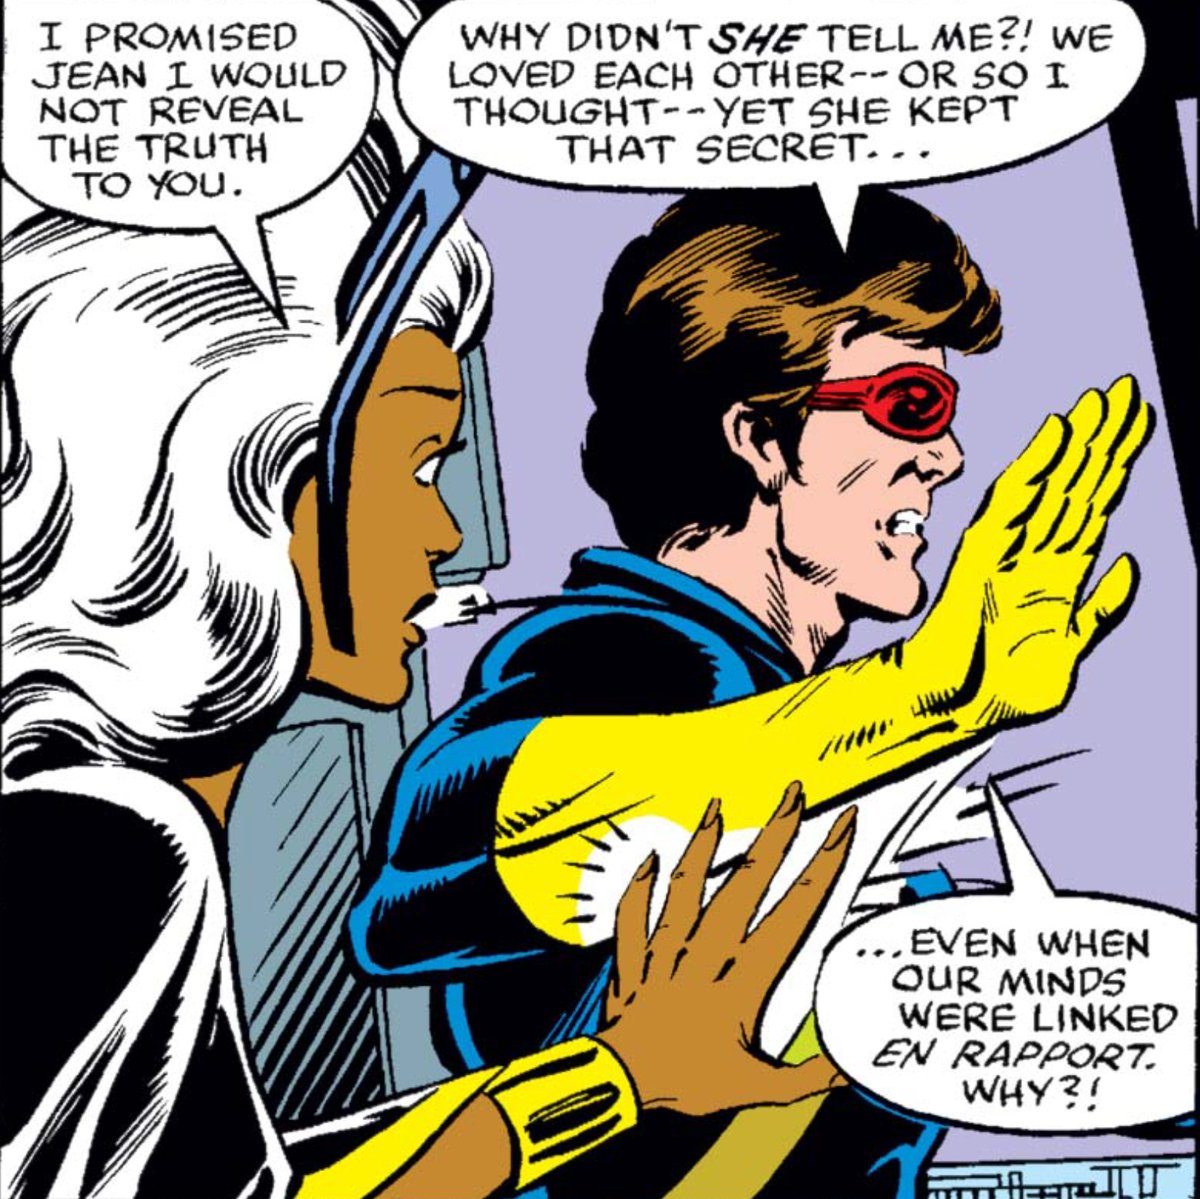 With the Sidri off their tail, Scott has time to confront his anger with Ororo. Even more than it does with Corsair, her "betrayal" cuts deep. His expectations mean Ororo's let him down, even if those expectations are unfair. Relationships remain among Scott's weaknesses.